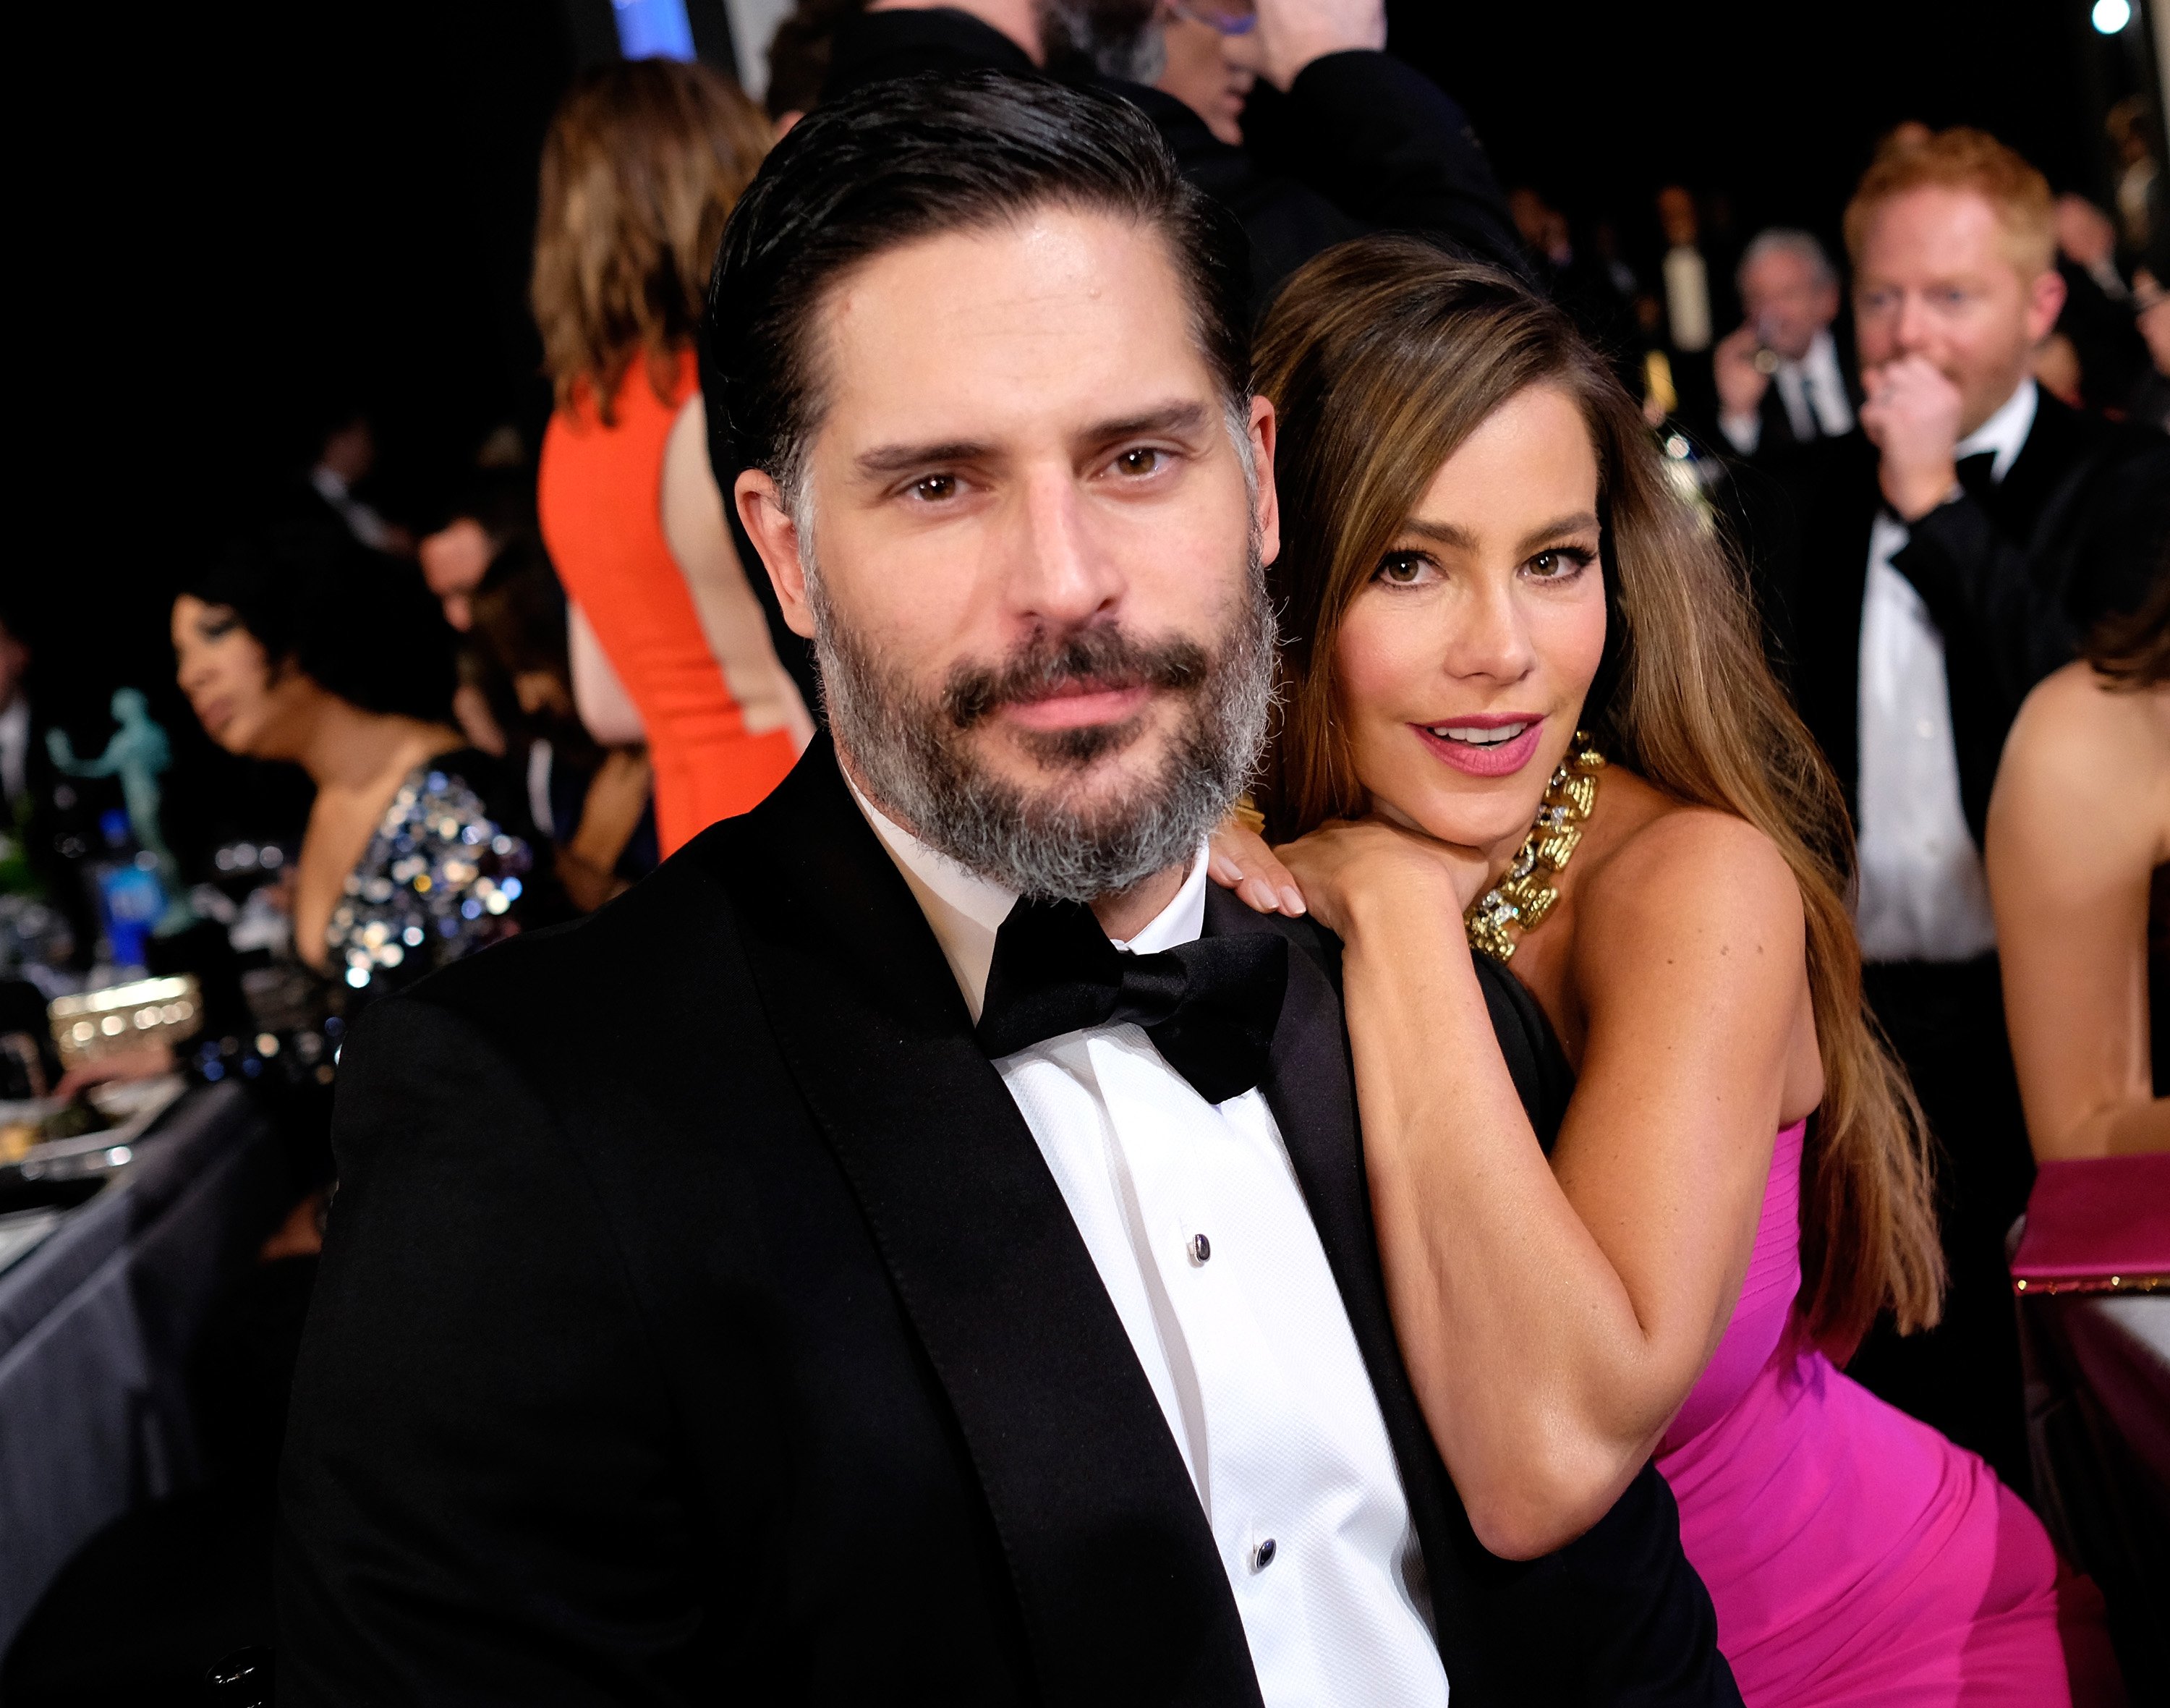 Joe Manganiello and Sofia Vergara attend The 22nd Annual Screen Actors Guild Awards on January 30, 2016 in Los Angeles, California. | Source: Getty Images.